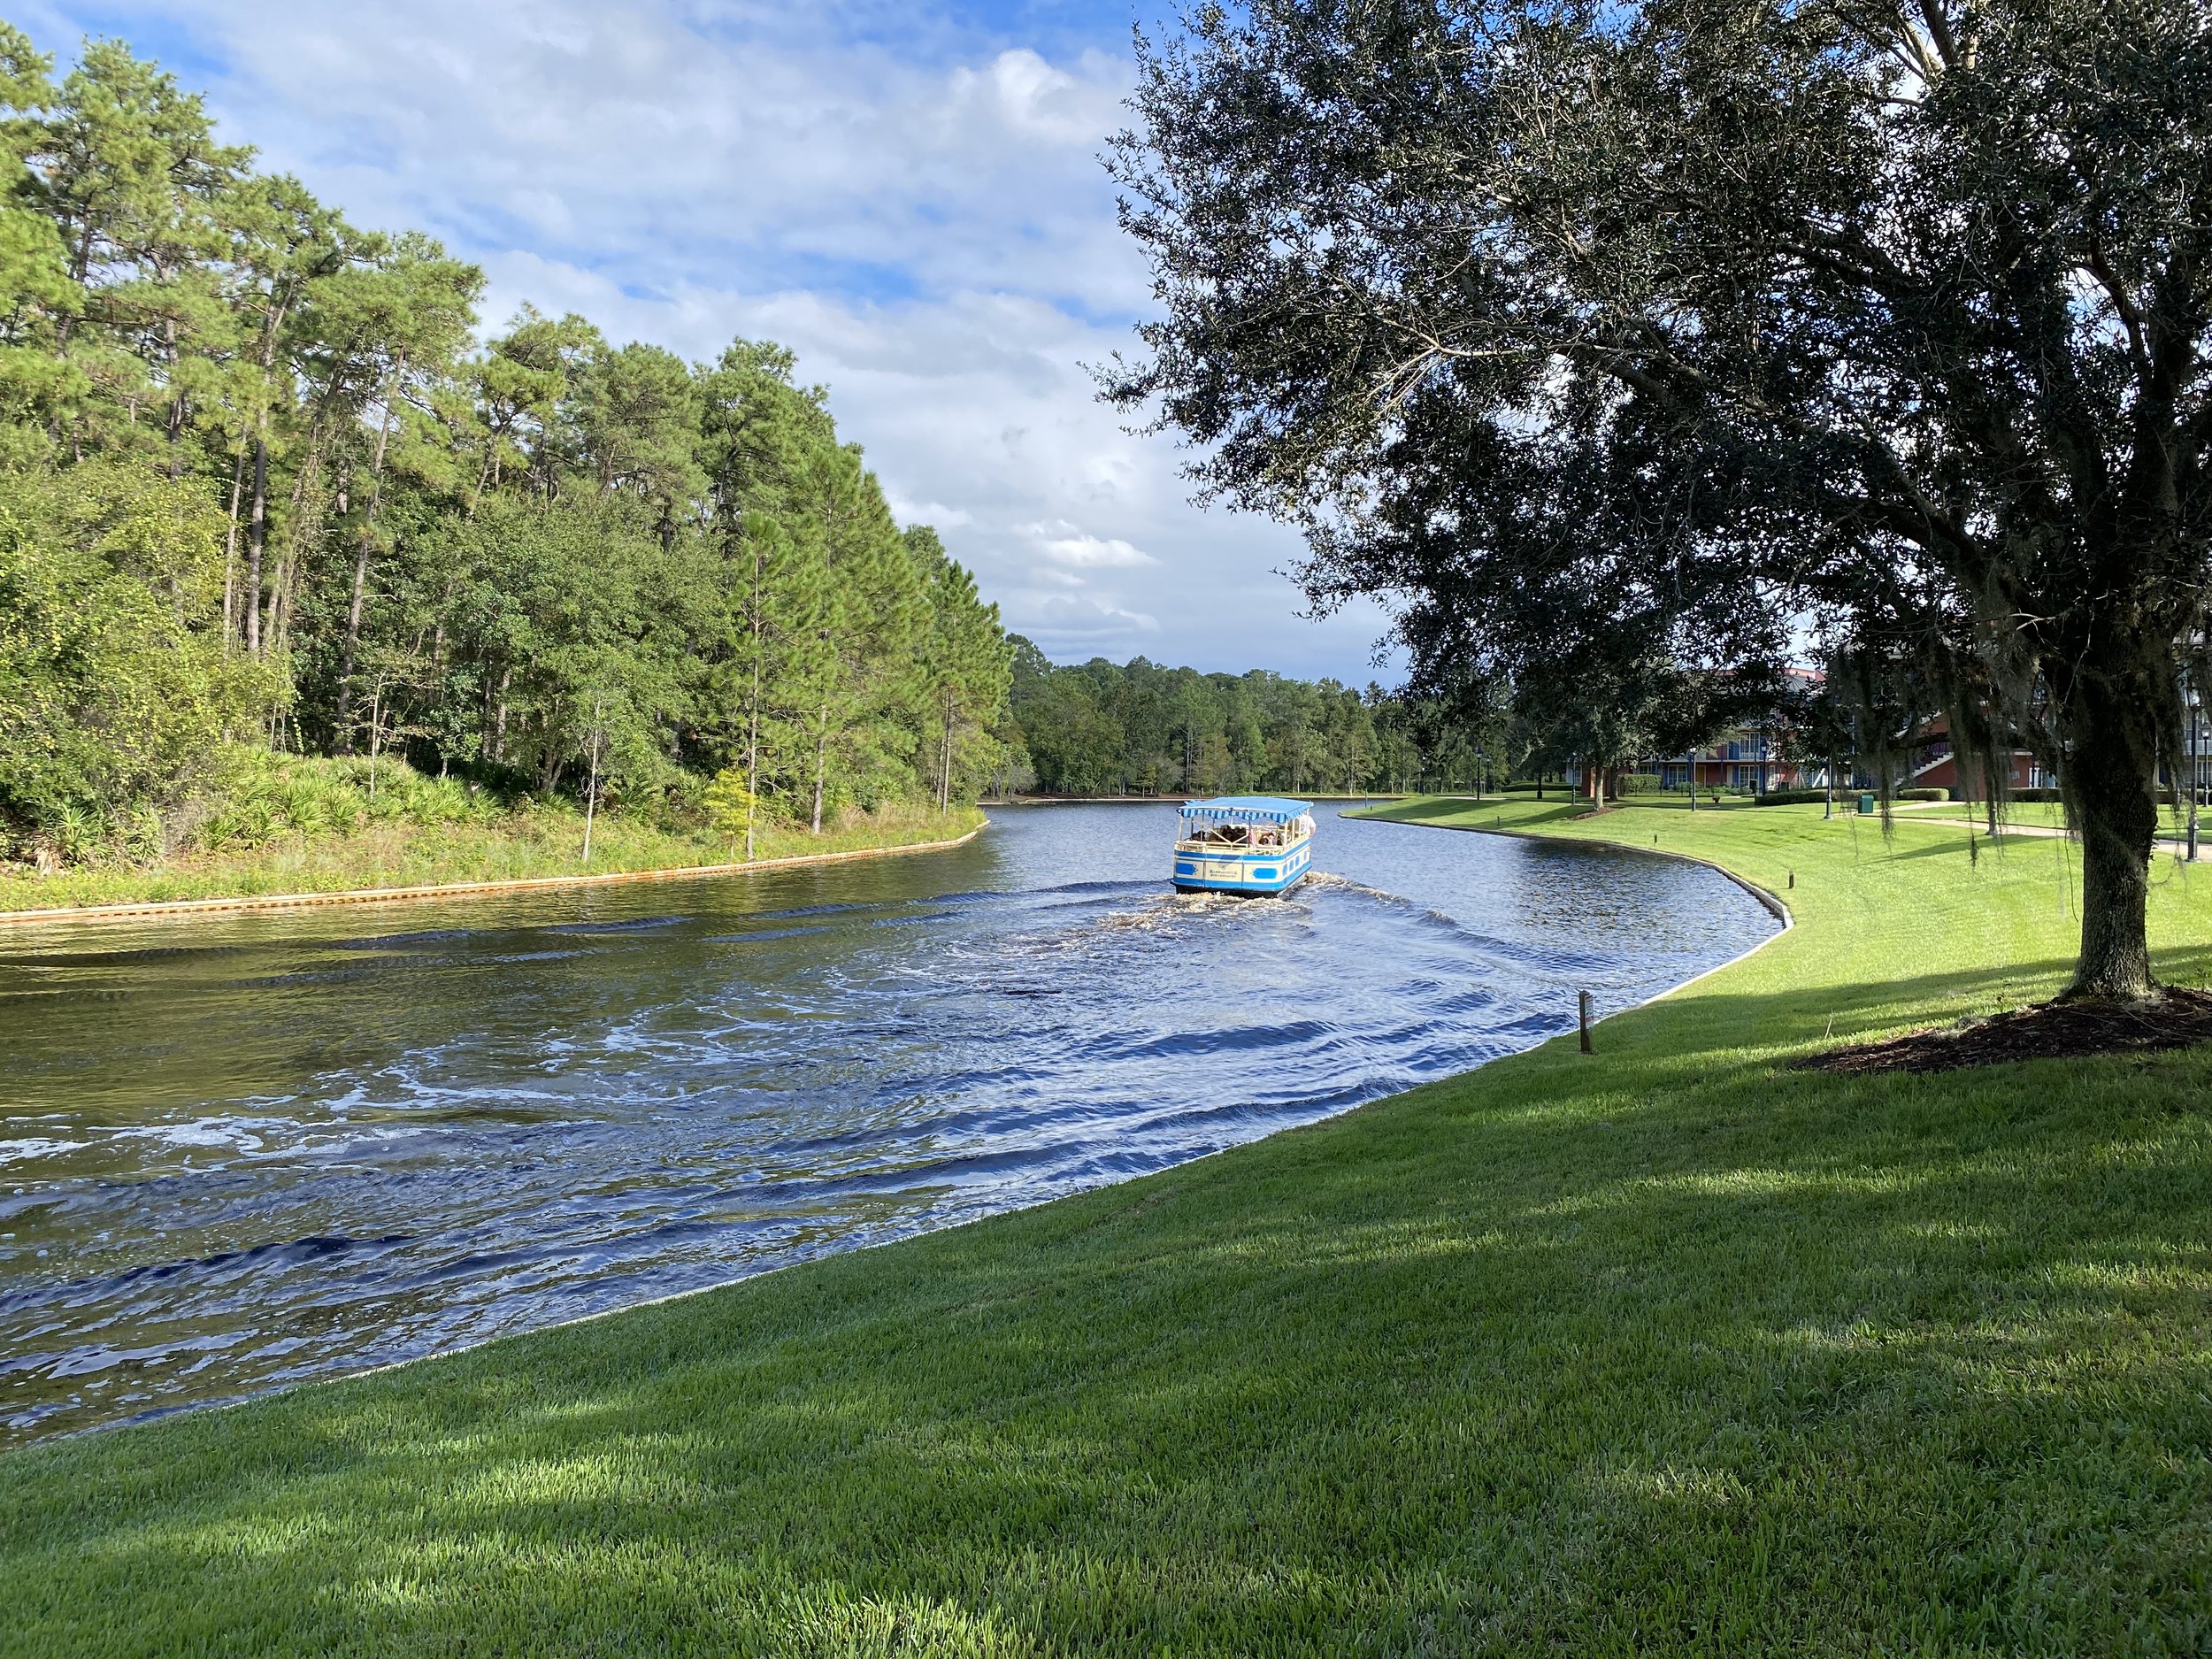  A Port Orleans water taxi is heading to Disney Springs on the Sassagoula River.   It’s a fun take a boat ride even just for something to do. You’ll pass by Disney’s Saratoga Springs Resort, Disney’s Old Key West Resort, and some very unusual Treehou